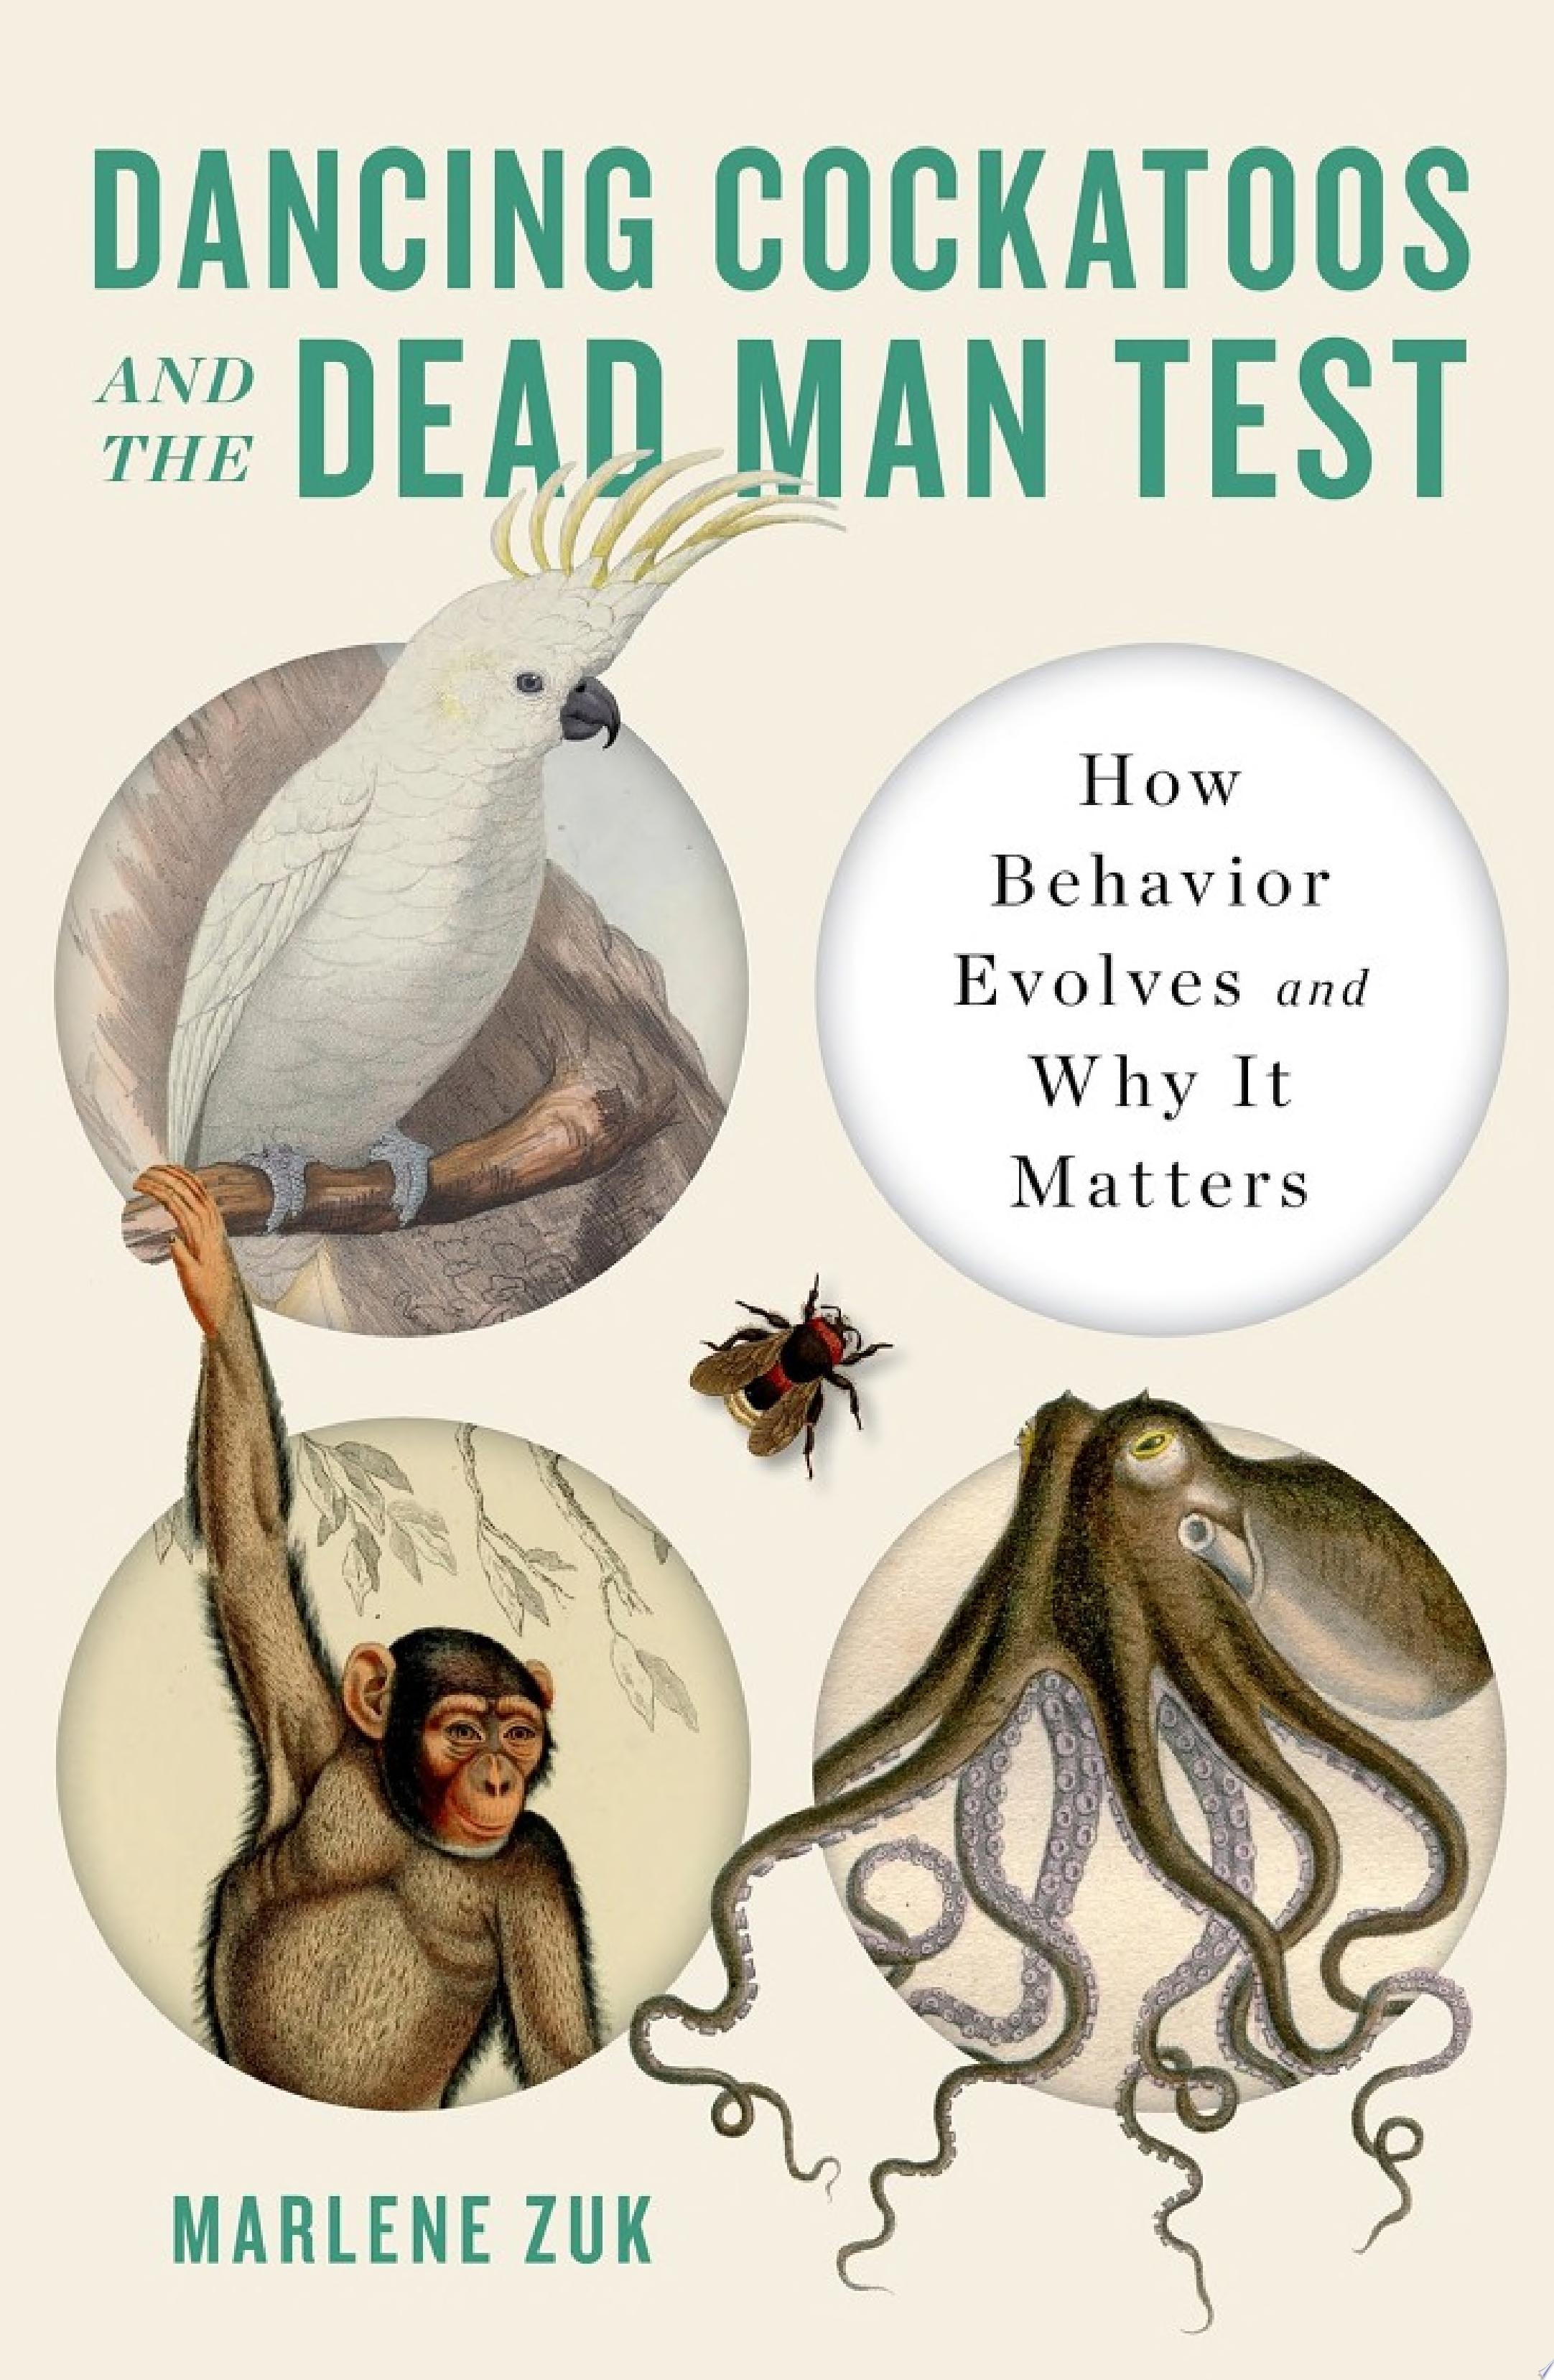 Image for "Dancing Cockatoos and the Dead Man Test: How Behavior Evolves and Why It Matters"